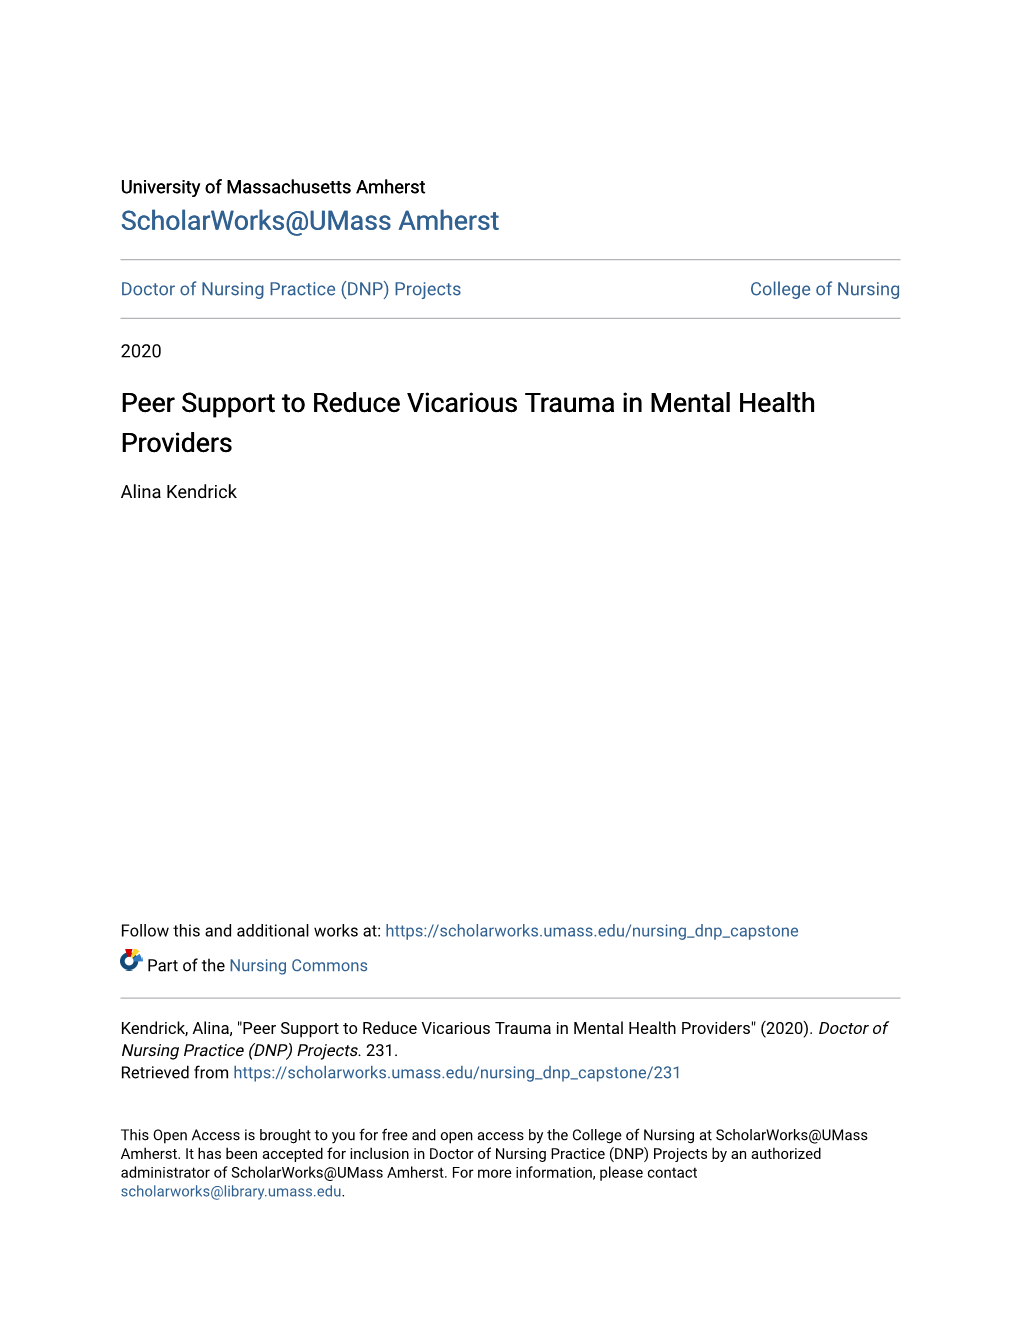 Peer Support to Reduce Vicarious Trauma in Mental Health Providers